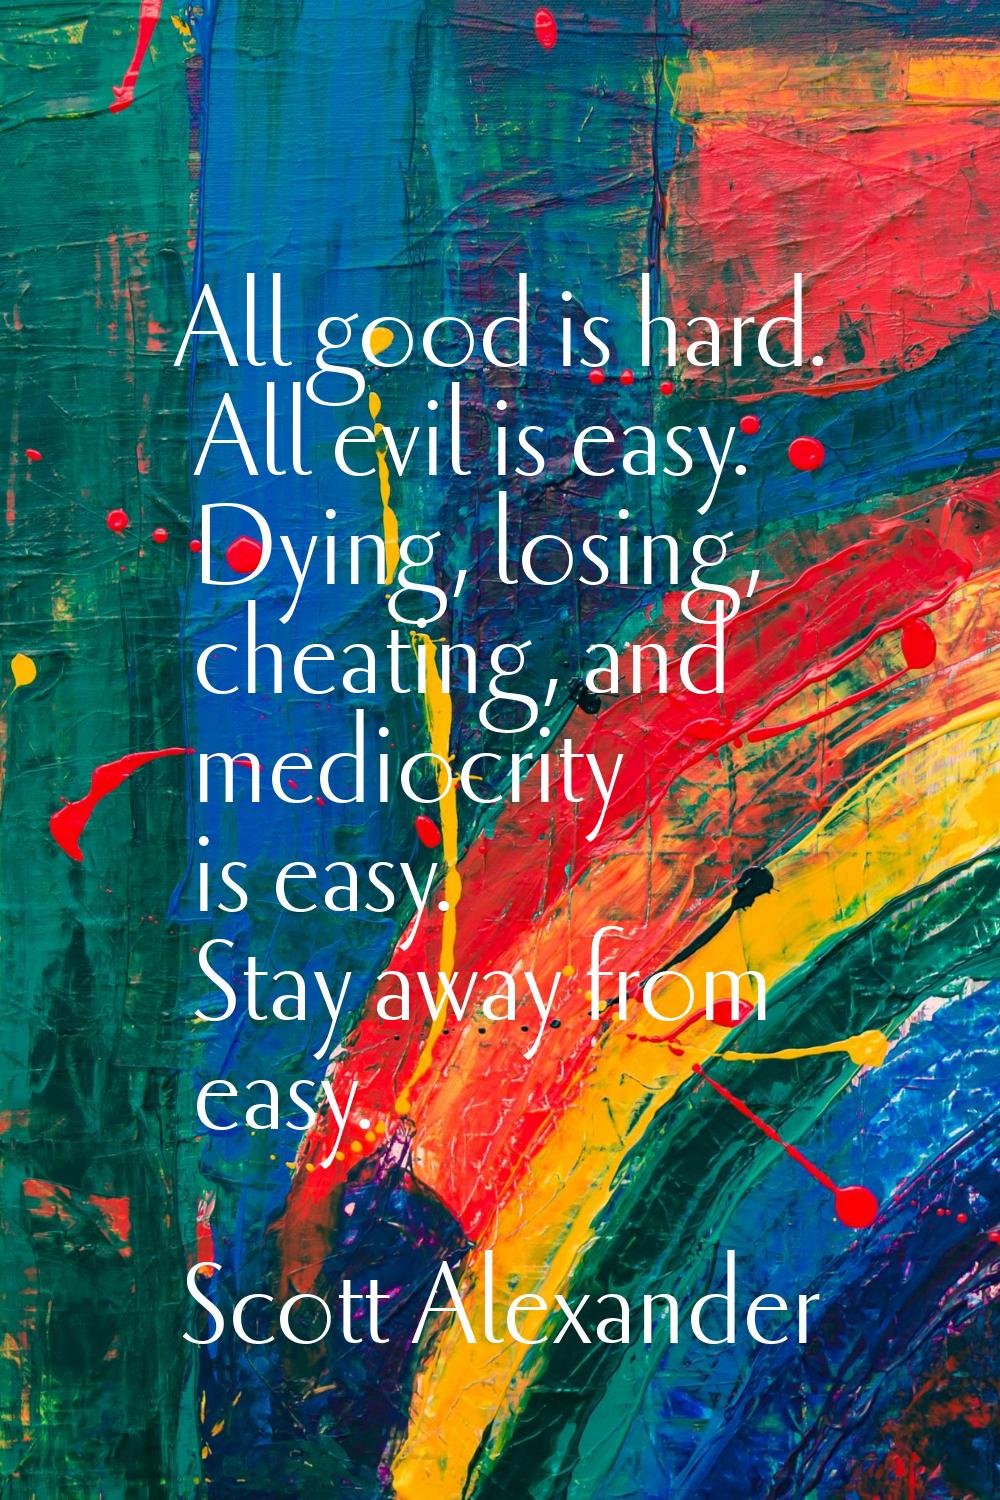 All good is hard. All evil is easy. Dying, losing, cheating, and mediocrity is easy. Stay away from